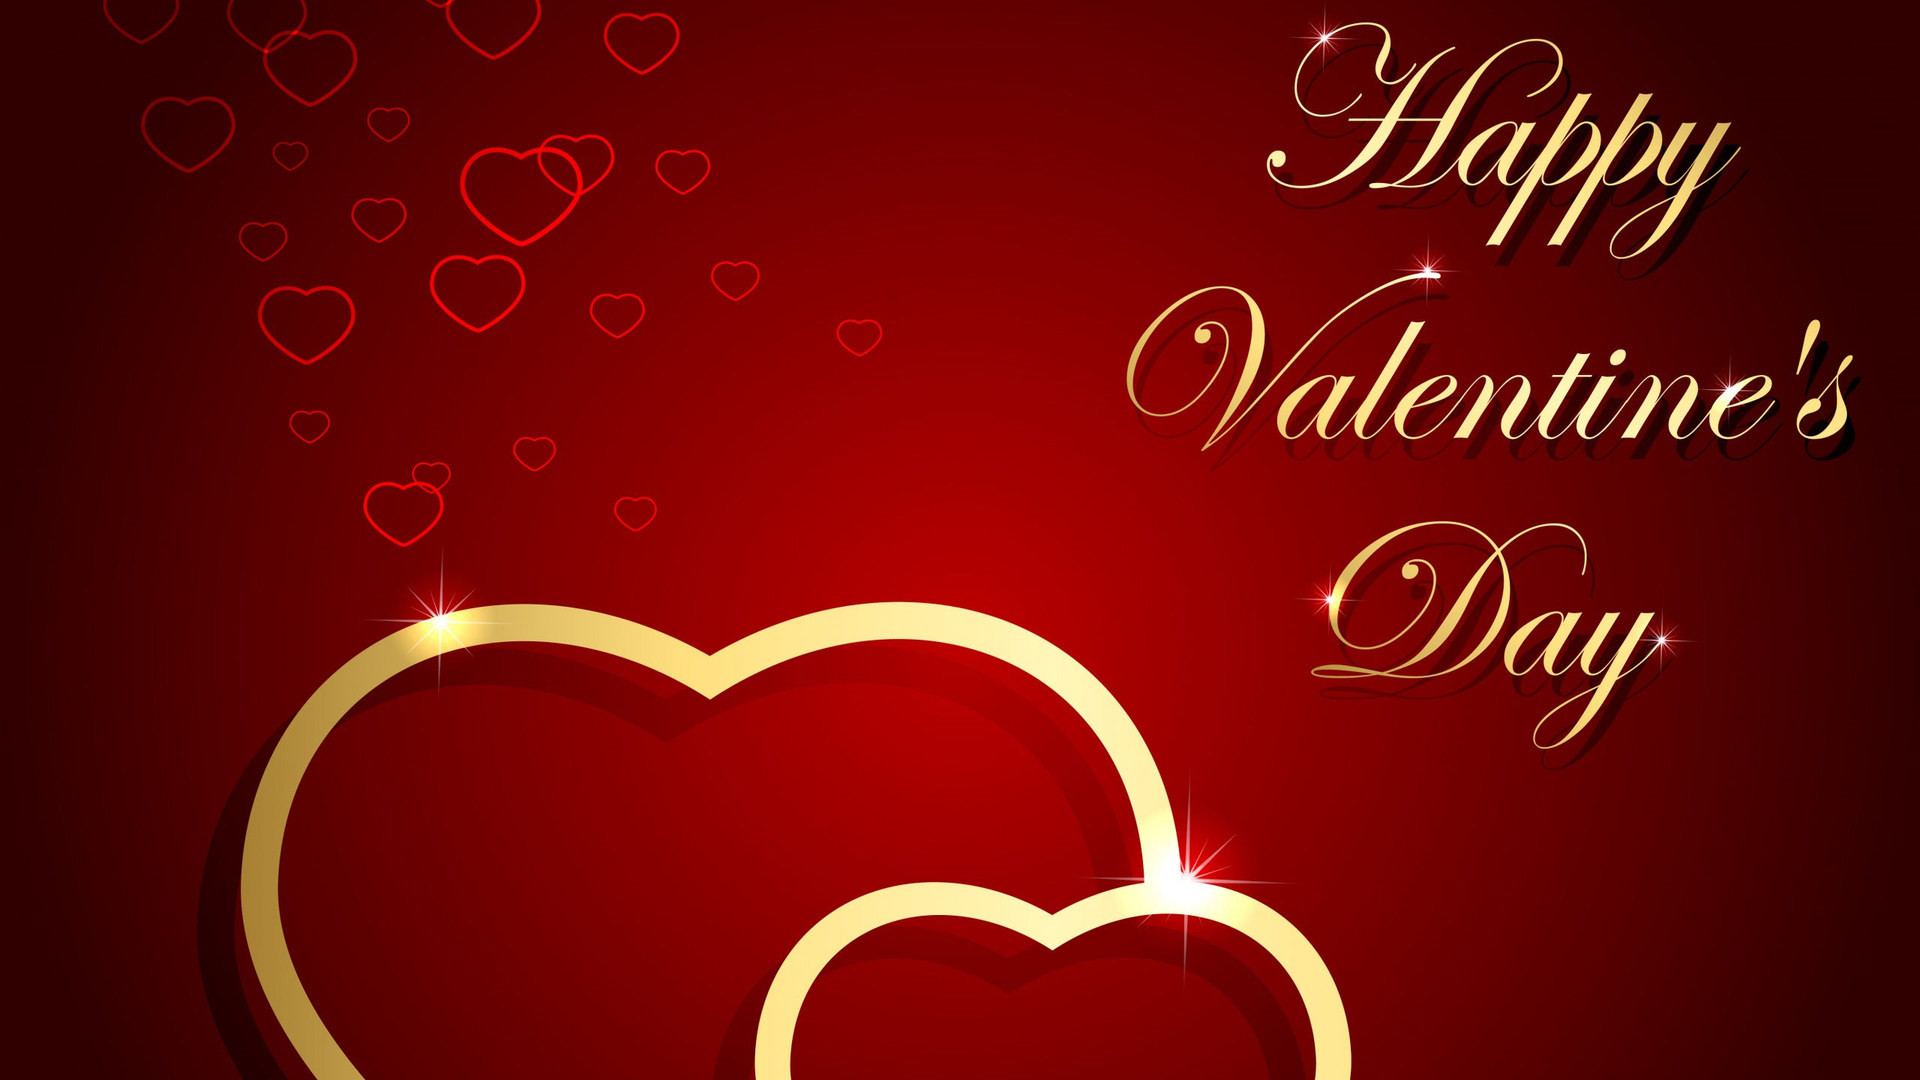 1920x1080 Inscription With Valentine's Day on a red background wallpapers and images  - wallpapers, pictures, photos